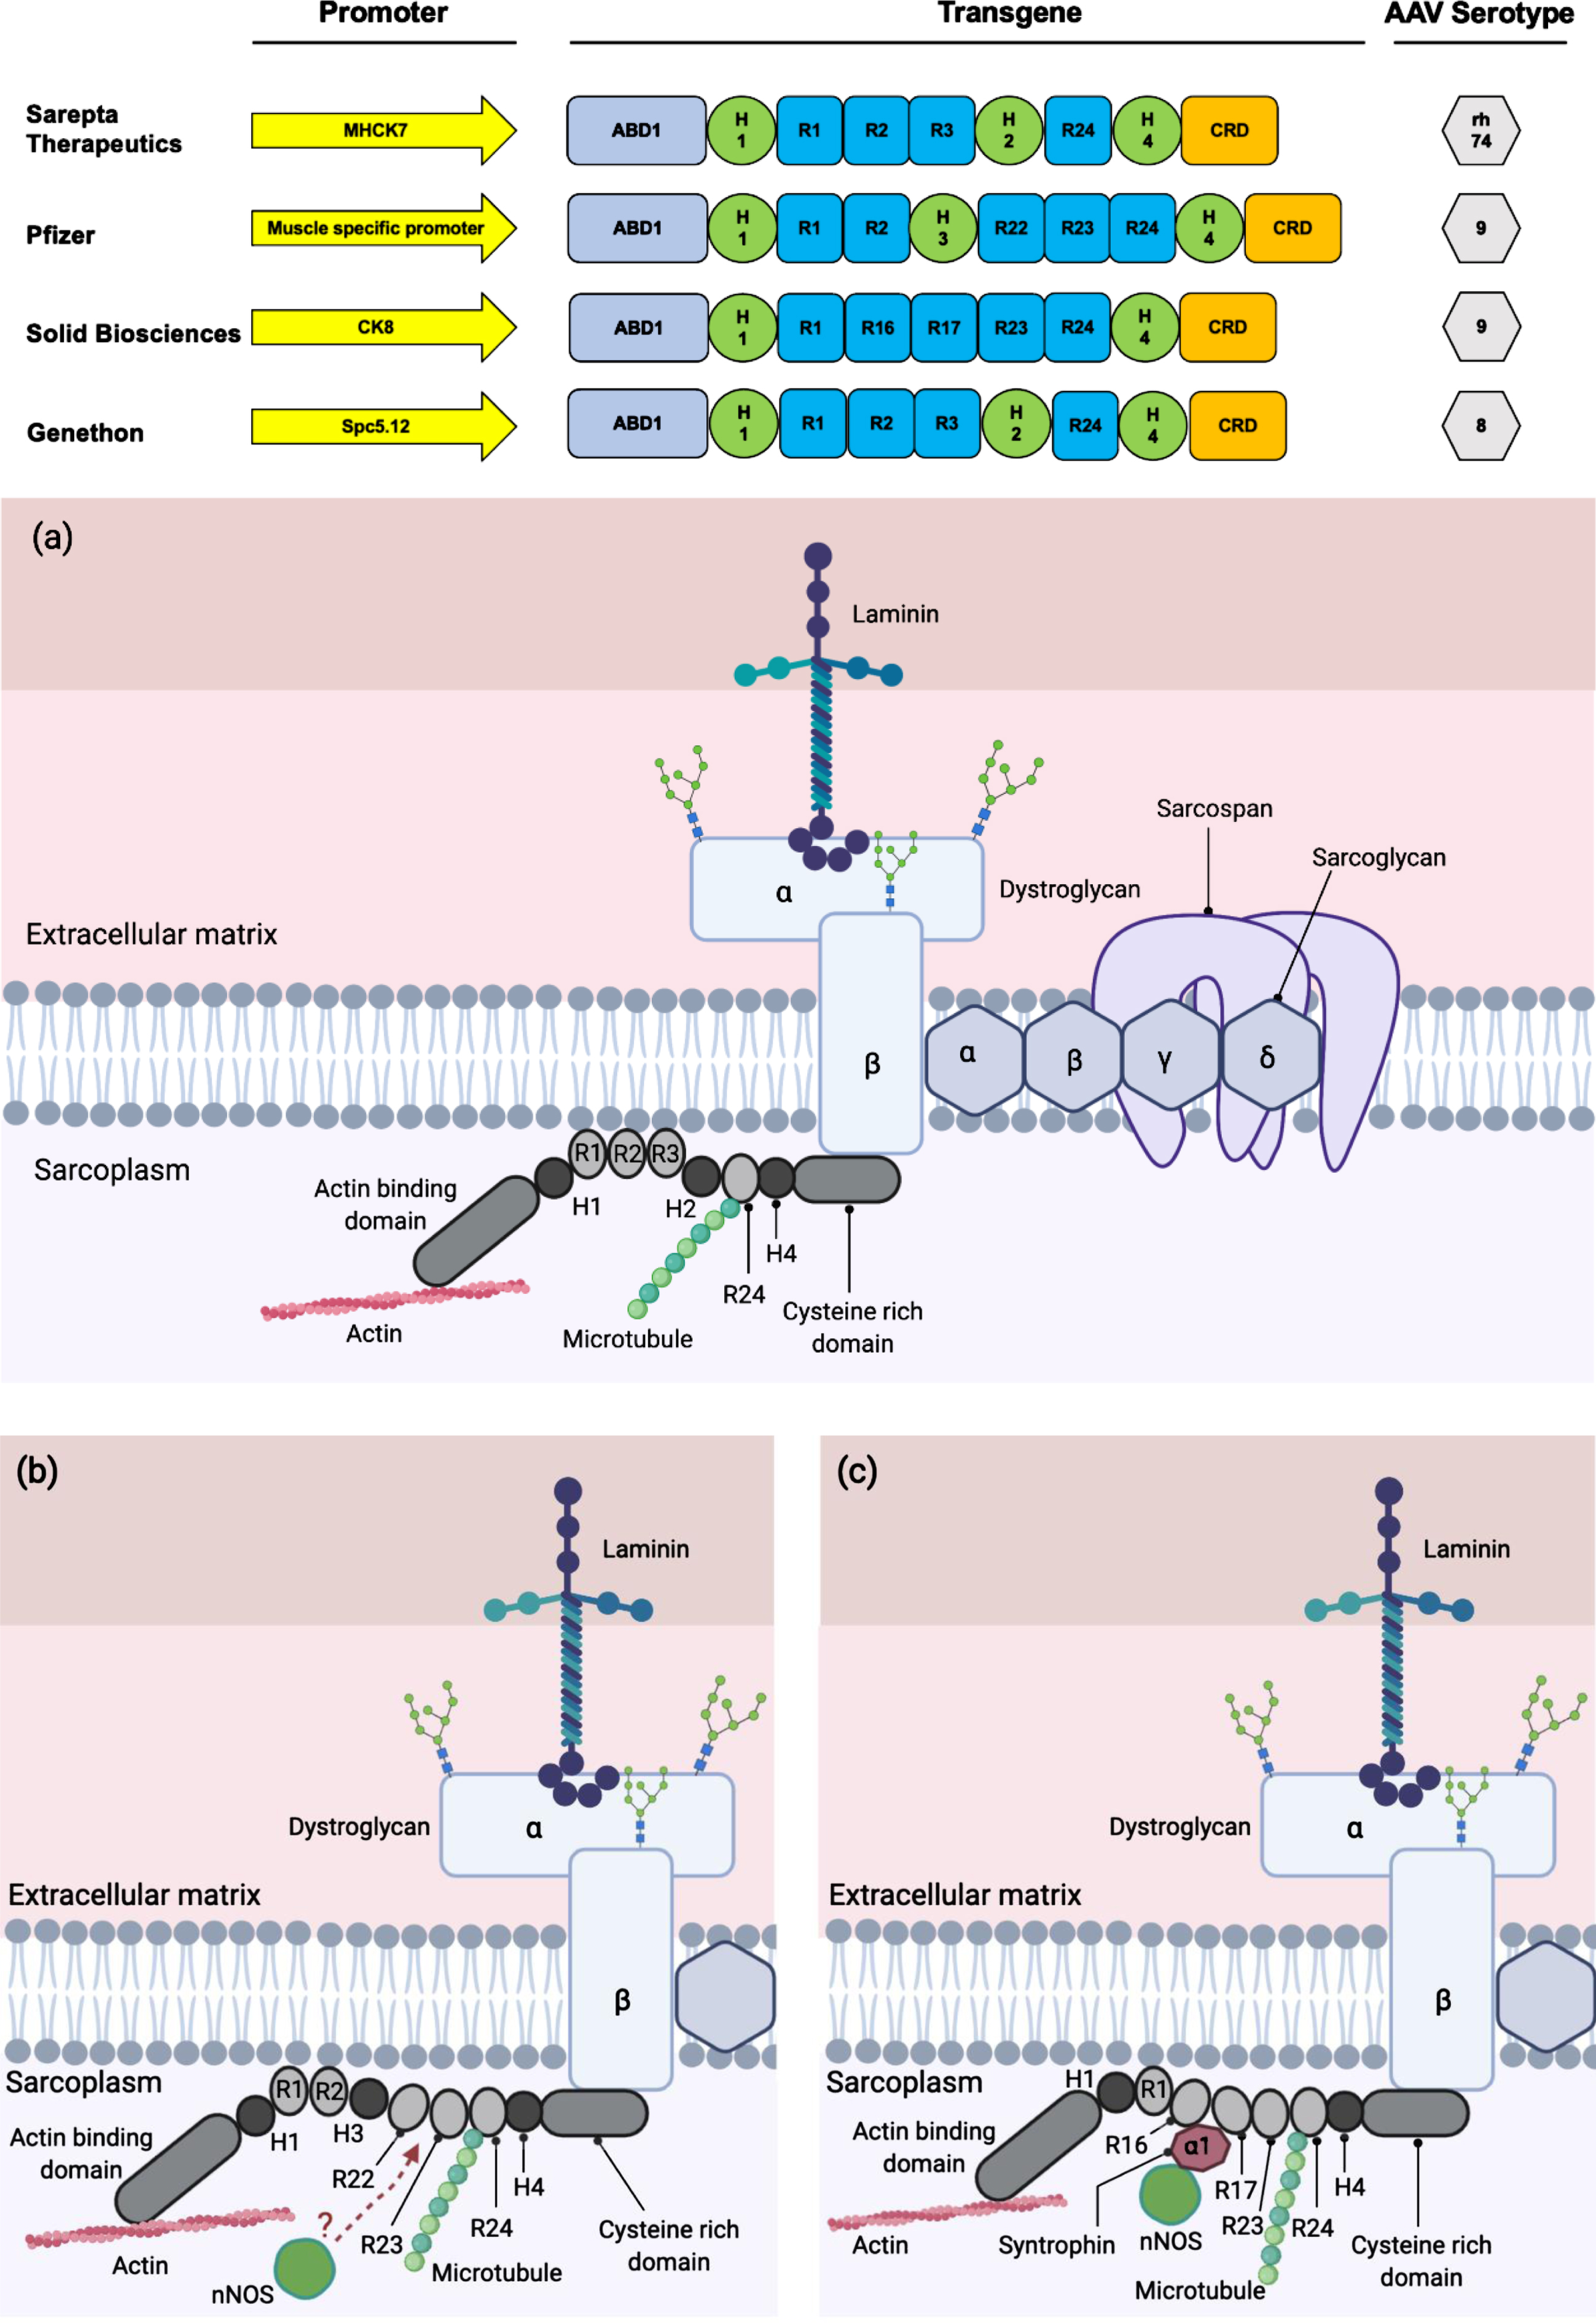 Clinically relevant miniaturised dystrophin constructs. (Top) The promoters utilised in the therapeutic constructs are shown by yellow arrows. These promoters are shown to be muscle and heart specific and will preferentially express the transgene in those tissues. The transgene of all the constructs contain the coding sequence for protein domains that are clinically relevant and functional. The AAV serotype of choice is also based on tissue tropism, where they are muscle and heart tropic. Clinical constructs for Sarepta Therapeutics (in partnership with Roche), Pfizer, Solid Biosciences and Genethon adapted from (48) (49) (50) and (9) respectively. ABD: Actin-binding domain; H: hinge; R: rod; CRD: cysteine-rich domain; CTD: C-terminal domain. (a) The localisation of microdystrophin-1 (MD1) protein (utilised by Sarepta Therapeutics and Genethon) to the DAPC. (b) The localisation of mini-dystrophin protein utilised by Pfizer to the DAPC. There remains a possibility of the recruitment of nNOS to the sarcolemma by the mini-dystrophin via an unknown mechanism (114) (115). (c) The localisation of microdystrophin protein utilised by Solid Biosciences to the DAPC.